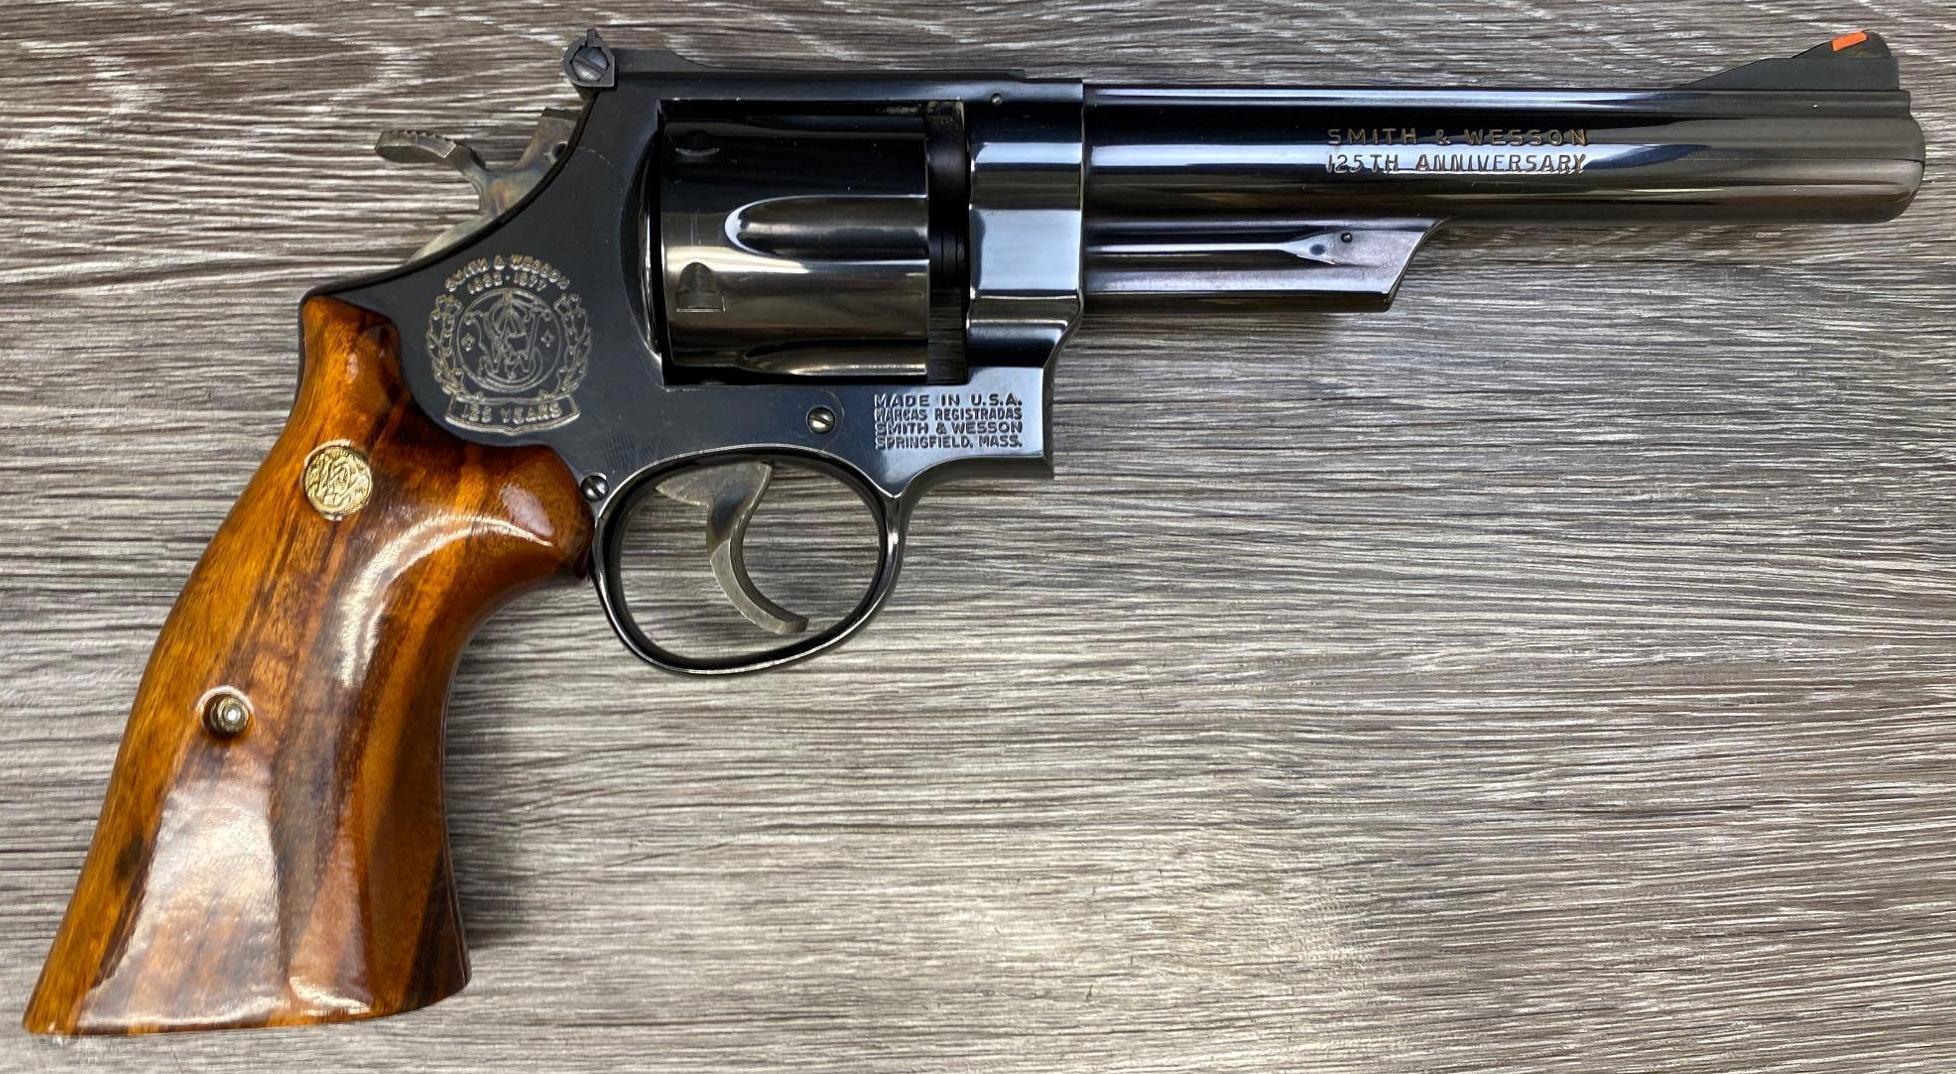 CASED 125th ANNIVERSARY SMITH & WESSON 25-3 .45 REVOLVER w/BOOK and MEDALLION